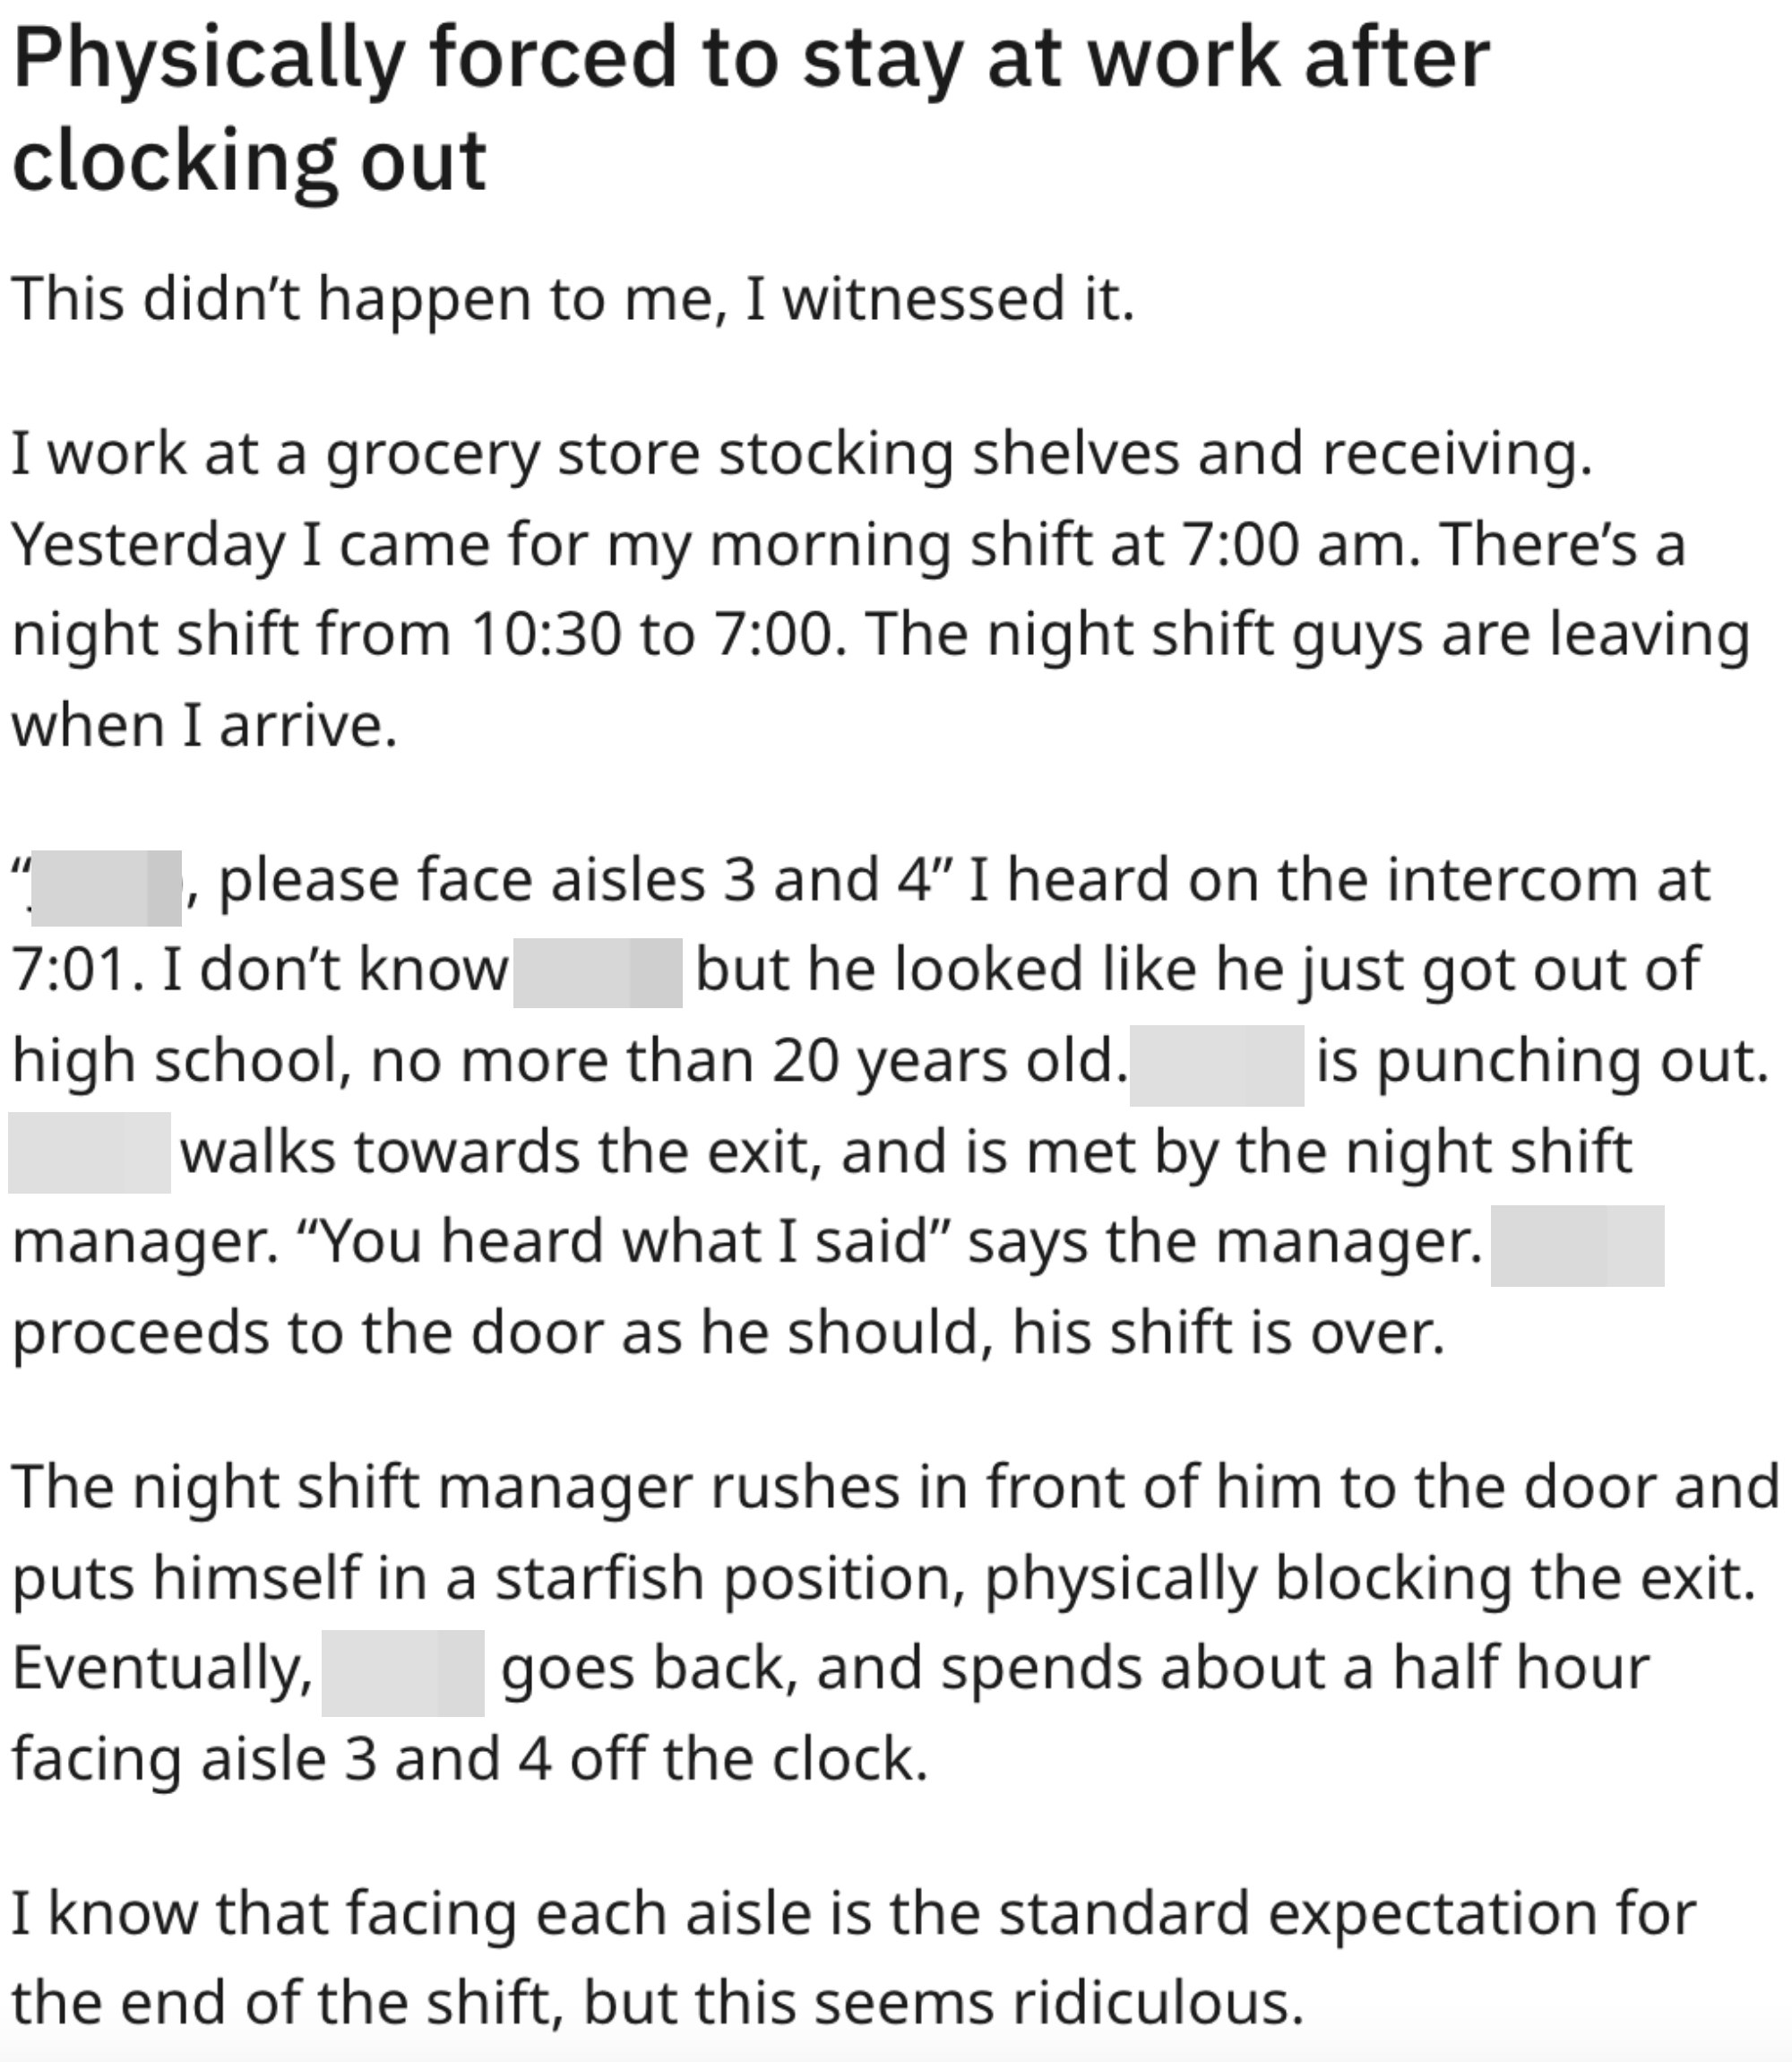 A boss threatening to &quot;block the exit&quot; if employees try to leave